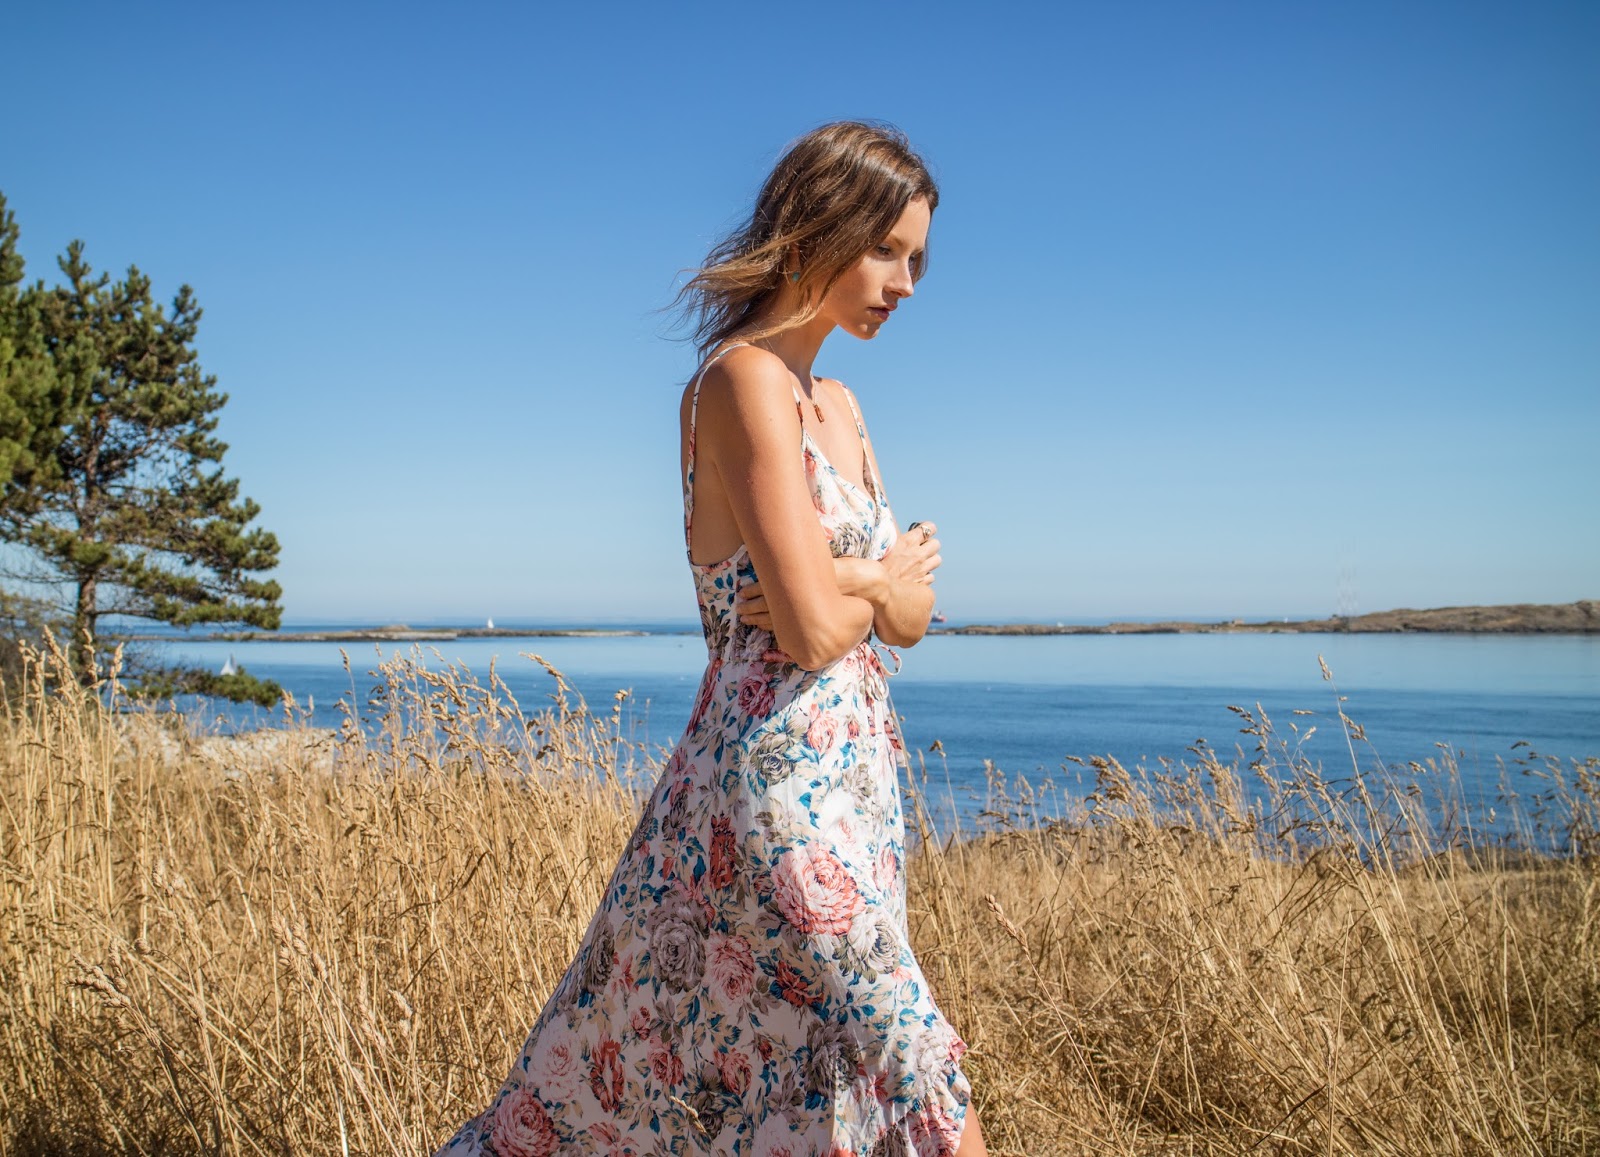 Fashion blogger, Alison Hutchinson, is wearing an Auguste Dress in Victoria, BC, Canada